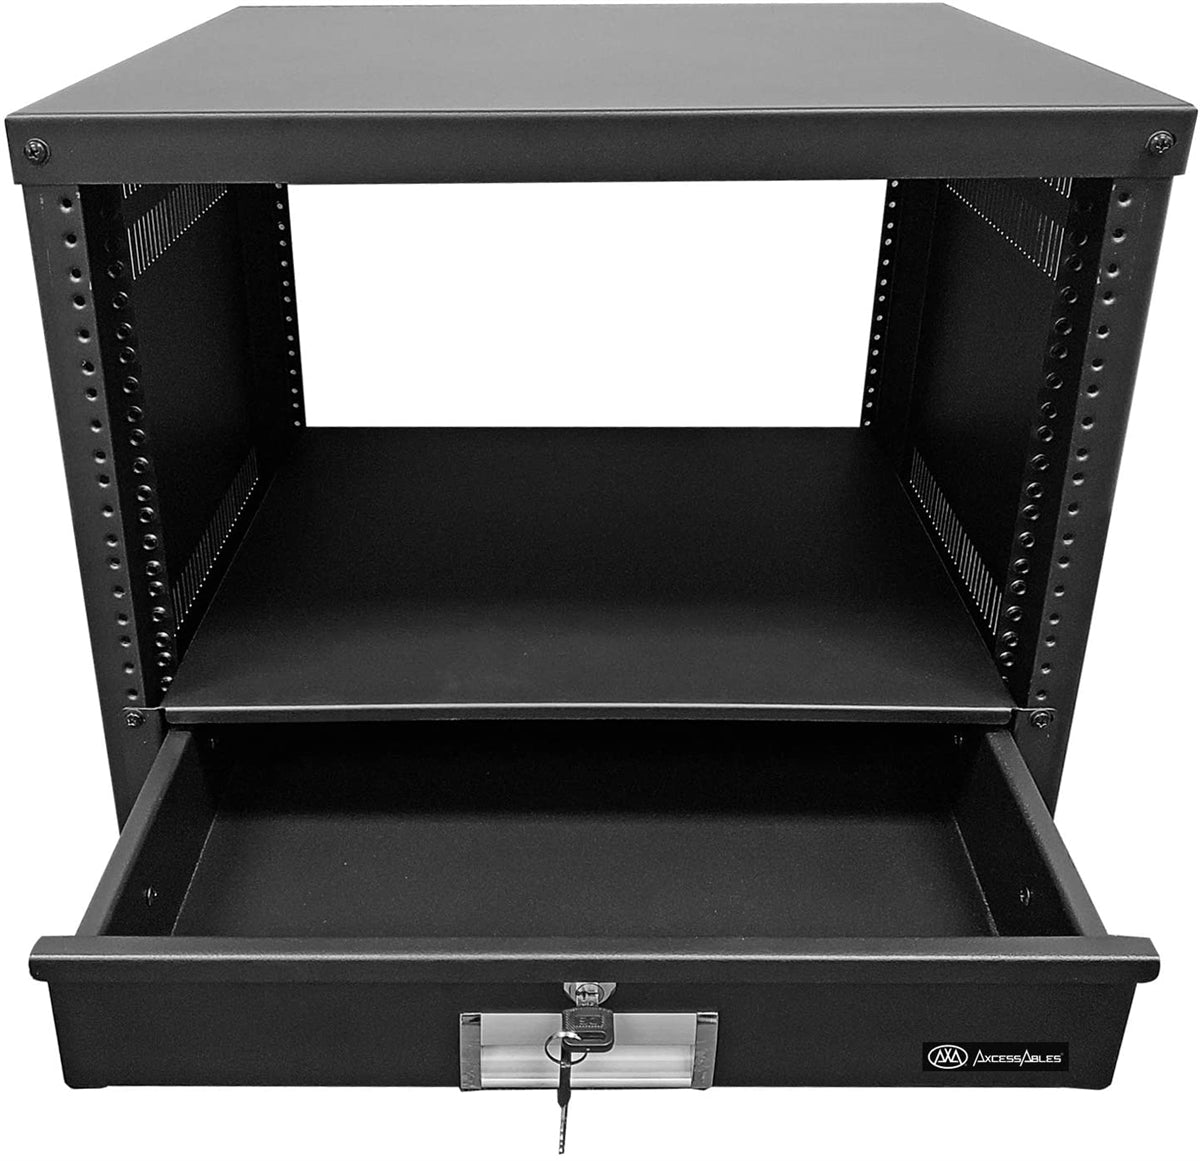 AxcessAbles 2U Locking Rack Drawer | 15-inch-Deep Secured Metal Server Rack Mount Storage Drawer | 45lb Capacity | Compatible with 19-Inch Networking Racks, Audio Video Equipment Cabinets (RKDRAWER2U) - Open Box